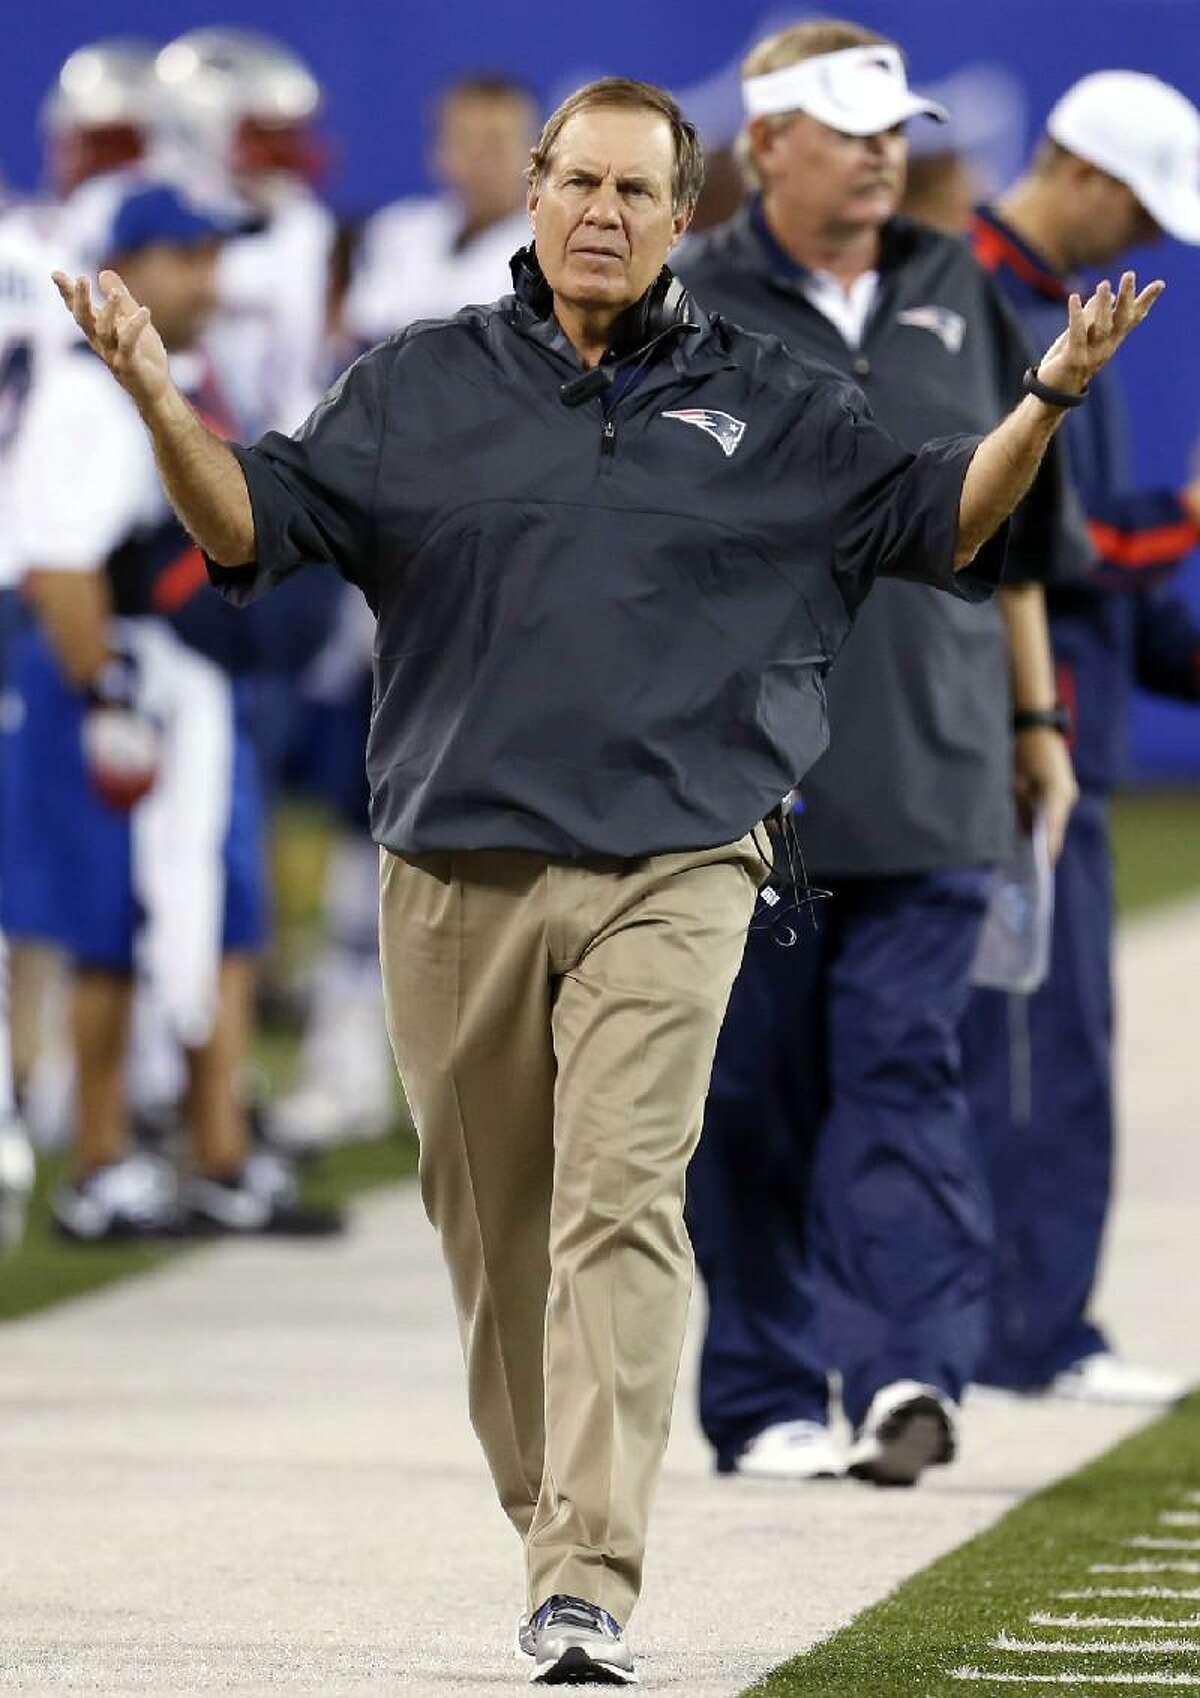 ASSOCIATED PRESS New England Patriots head coach Bill Belichick reacts to a call during the first half of a preseason game against the New York Giants on Wednesday night in East Rutherford, N.J.